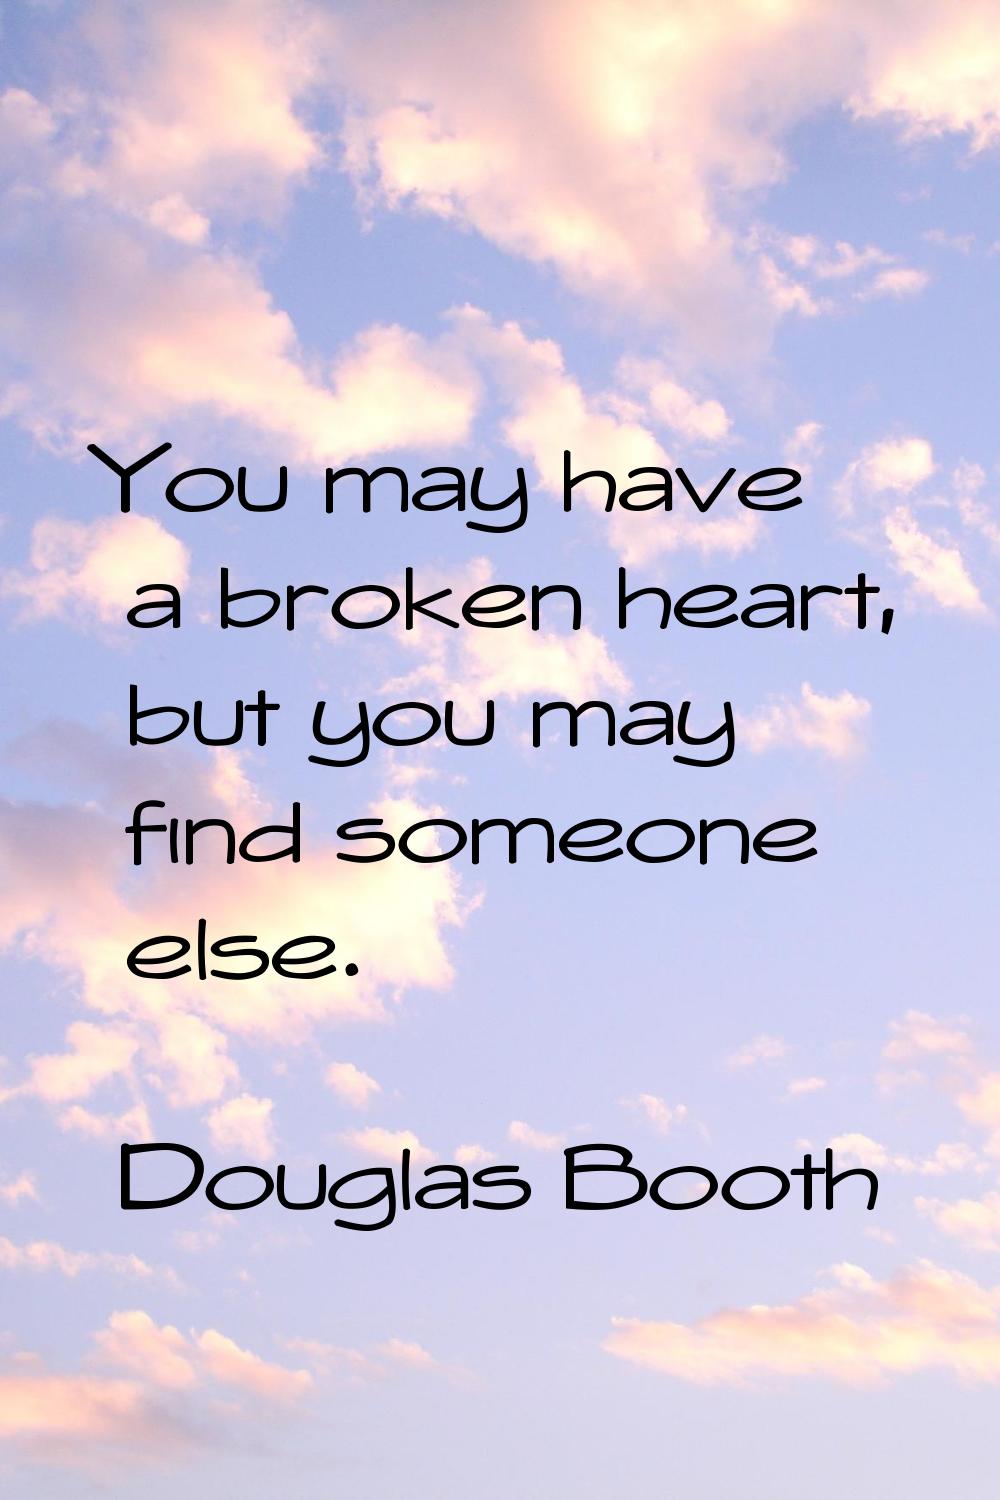 You may have a broken heart, but you may find someone else.